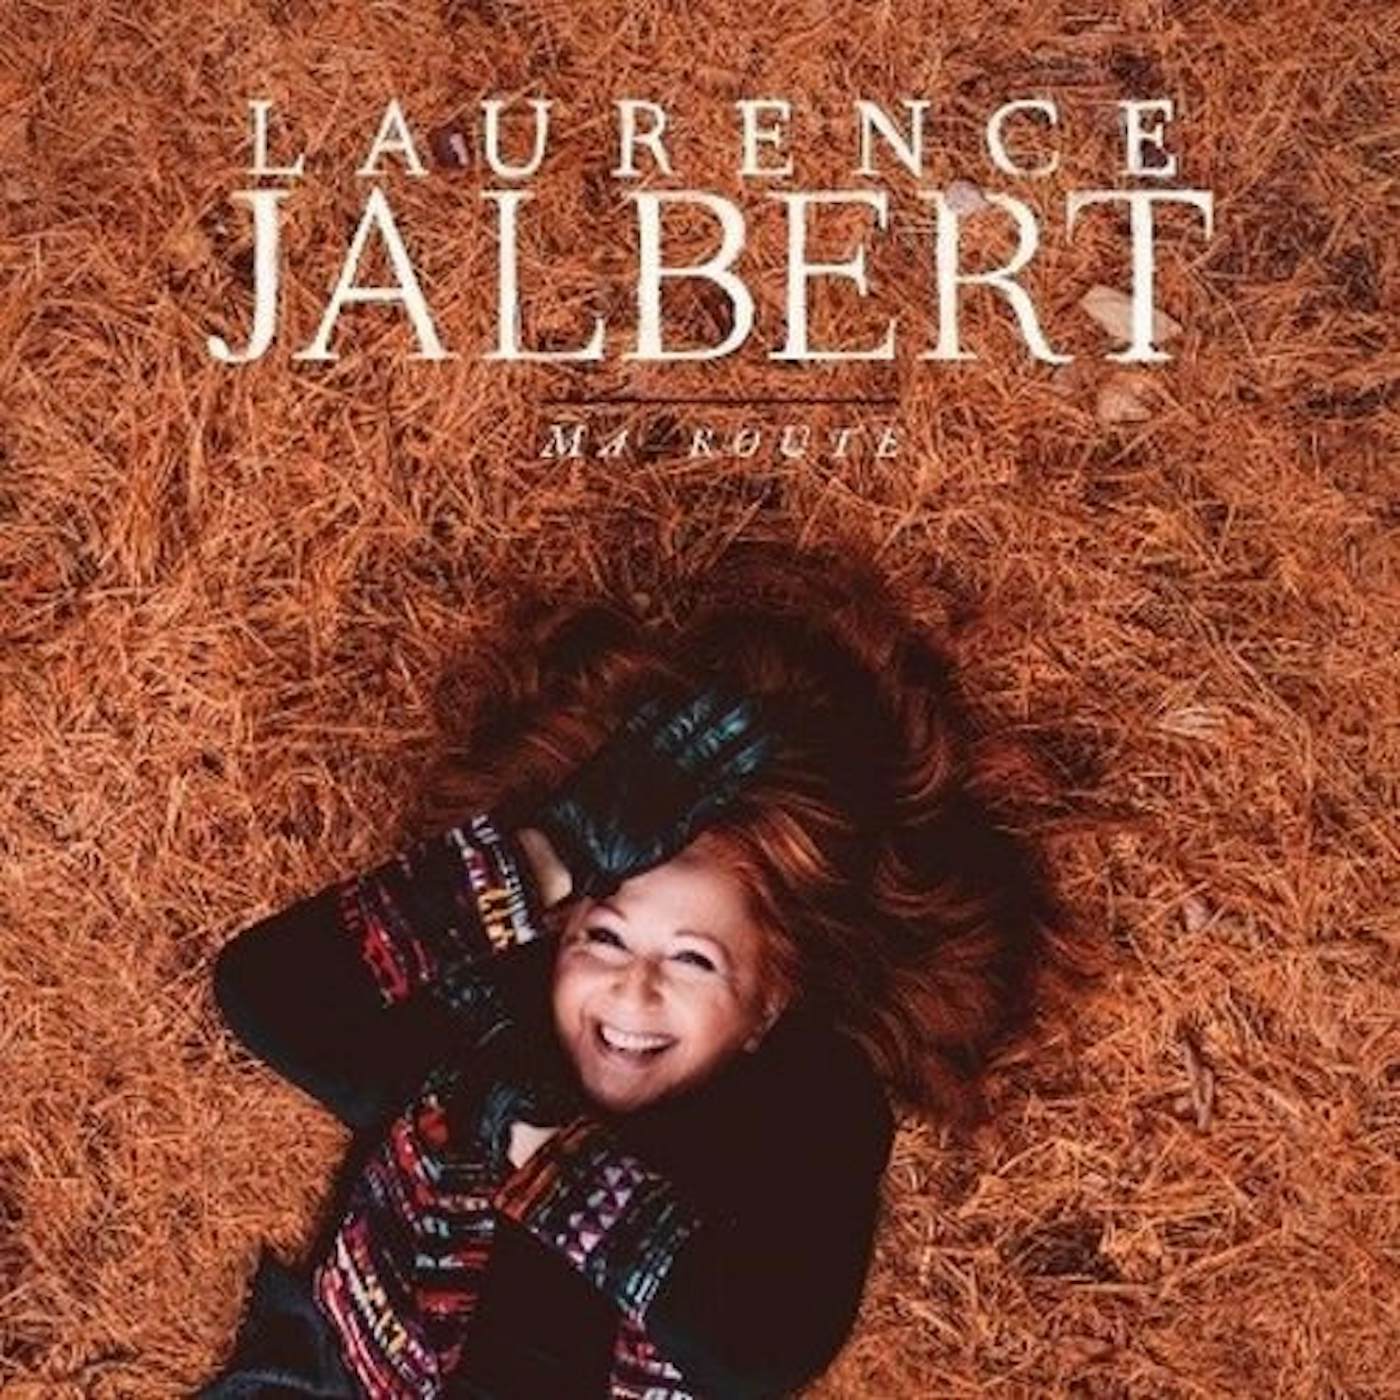 Laurence Jalbert MA ROUTE CD